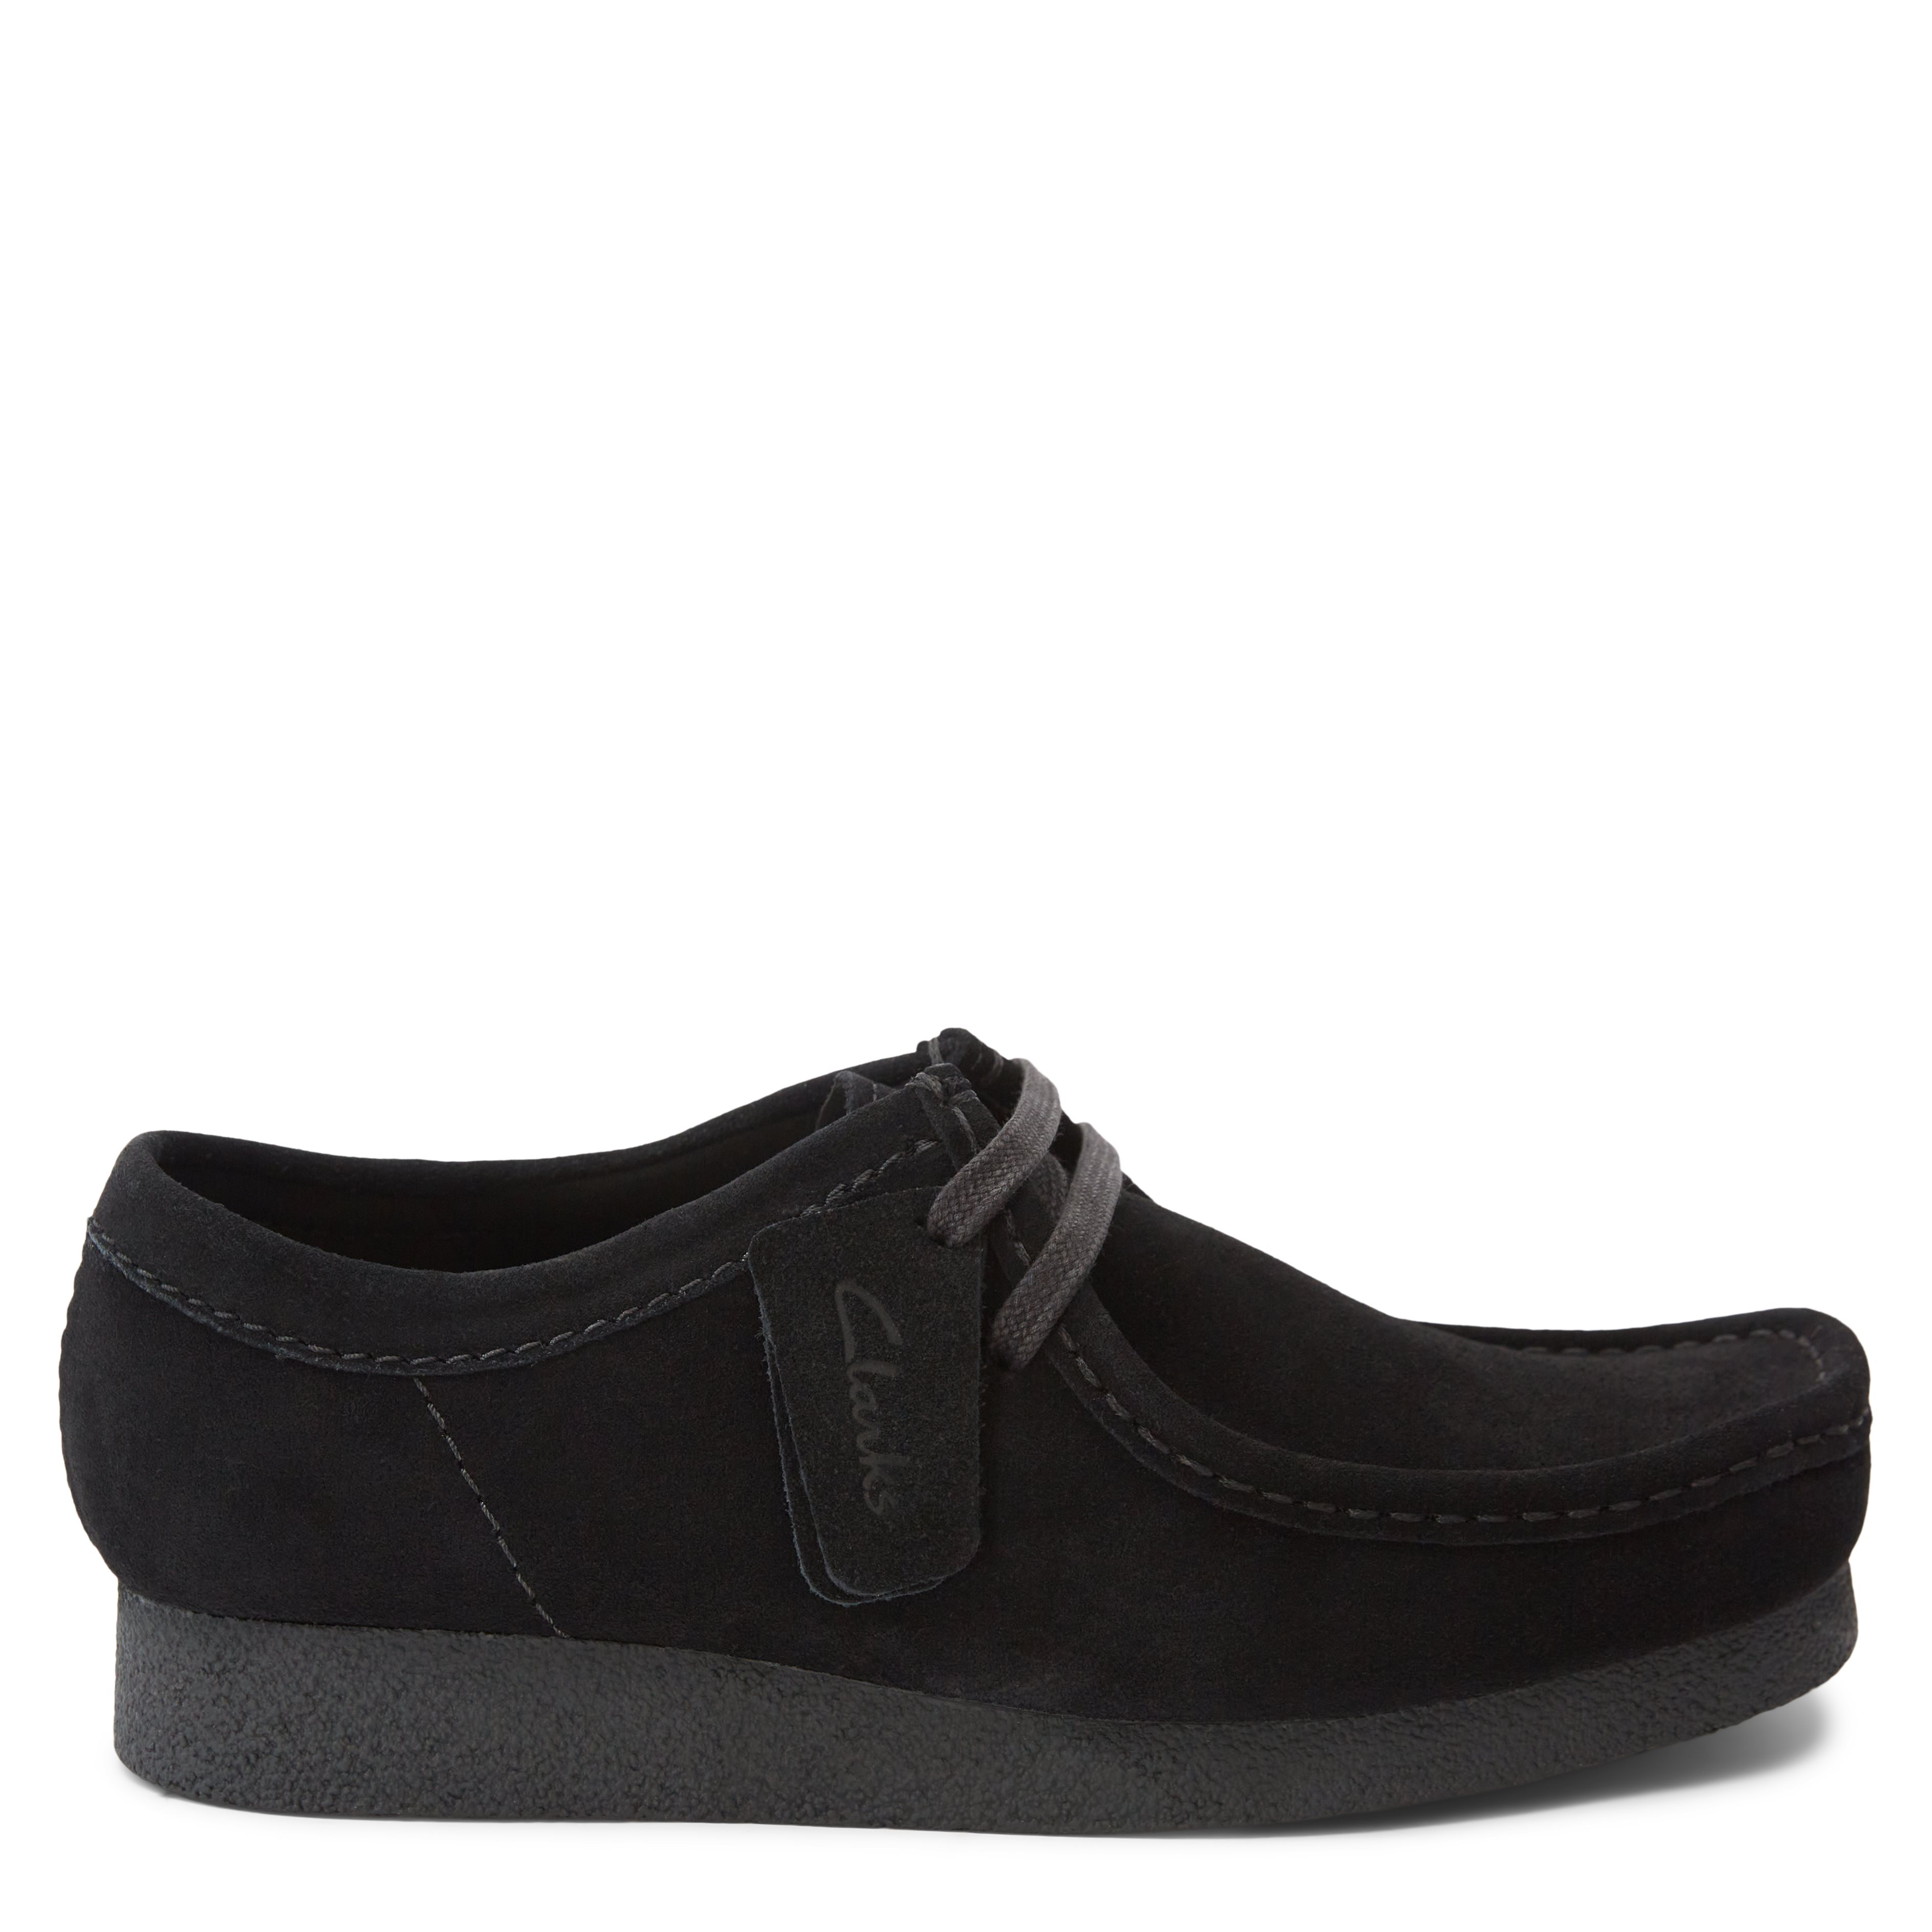 Clarks Shoes WALLABEE Black